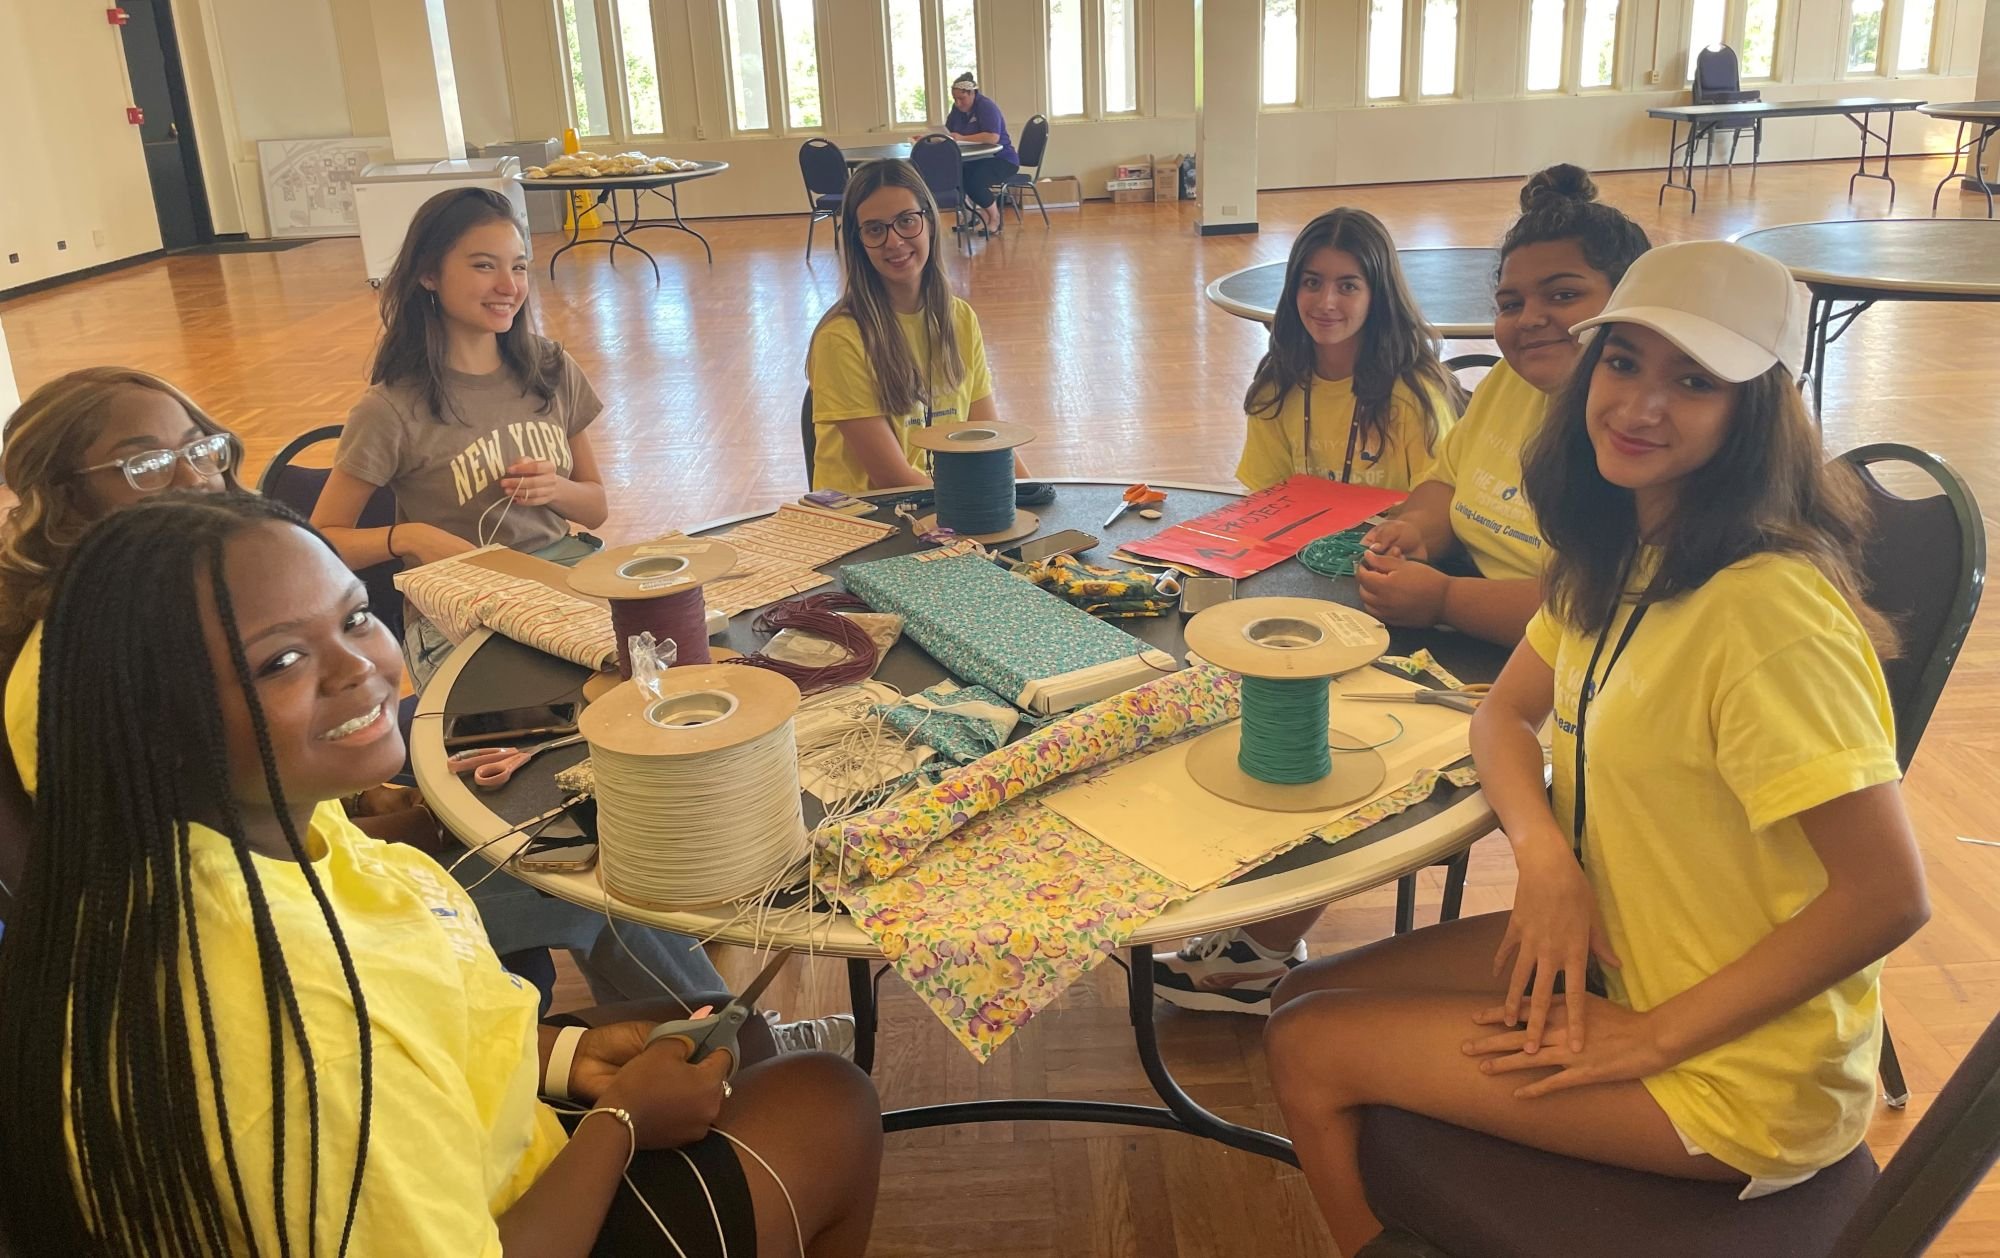 Seven UAlbany students sit around a craft table topped with patterned fabric and large spools of thread. Six are wearing matching yellow shirts.